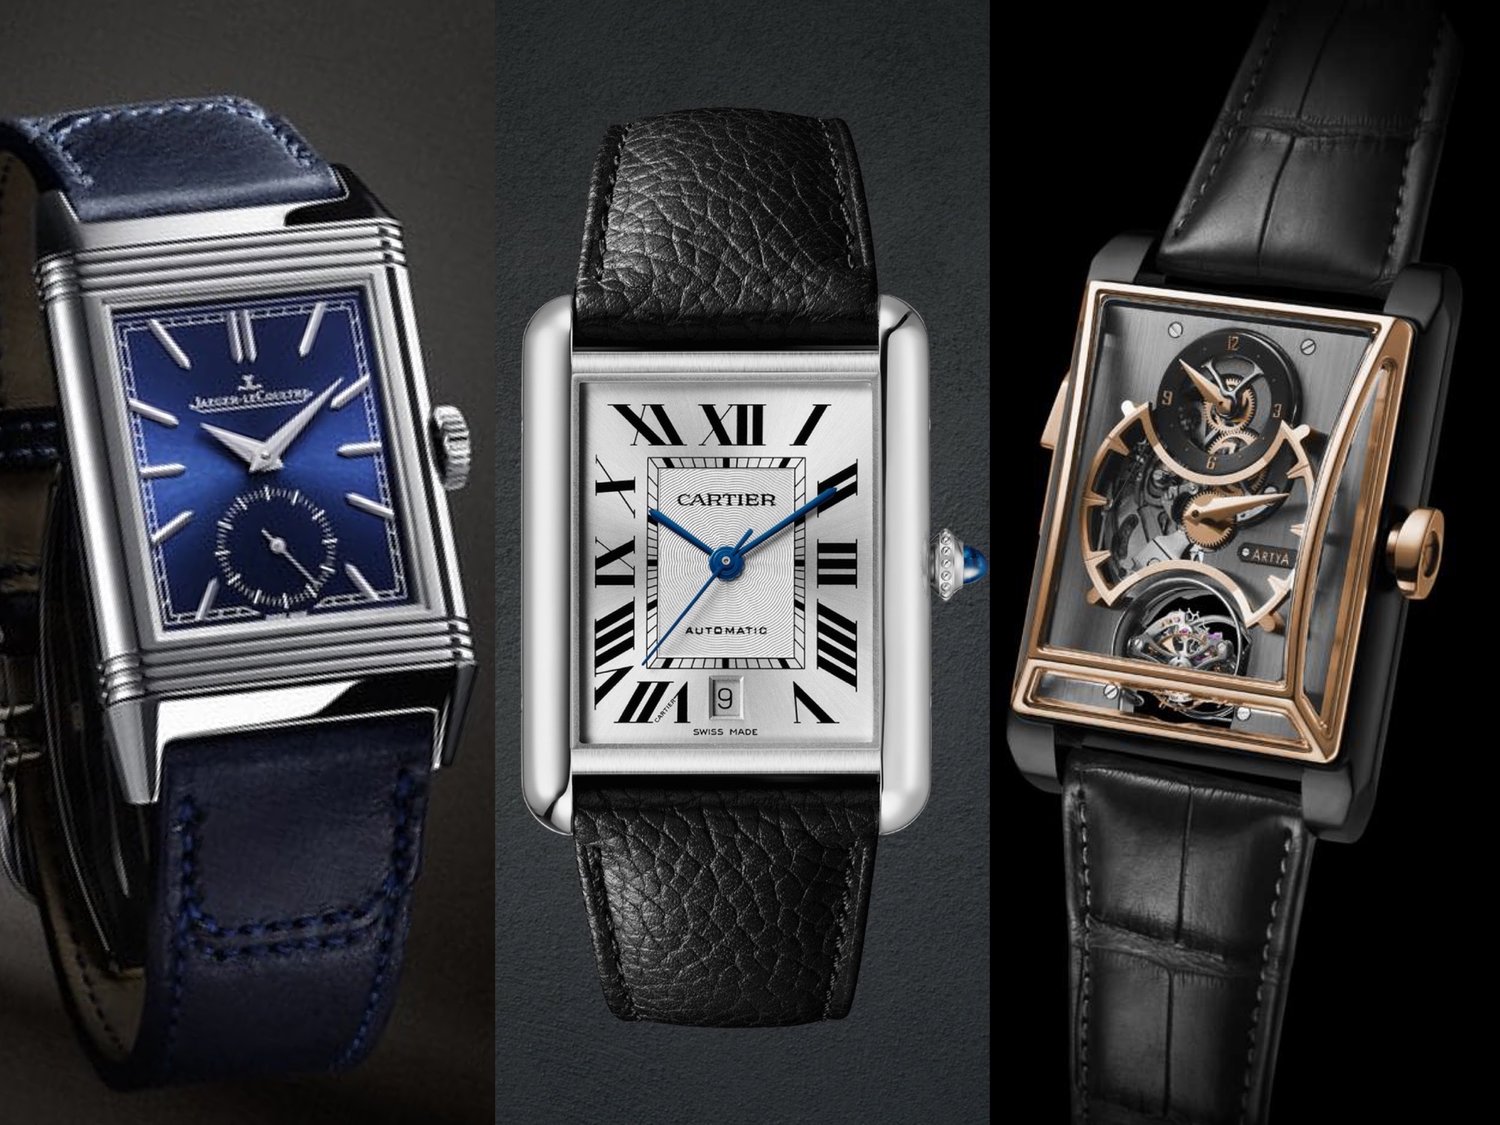 10 Watch ideas  watches for men, watches, luxury watches for men